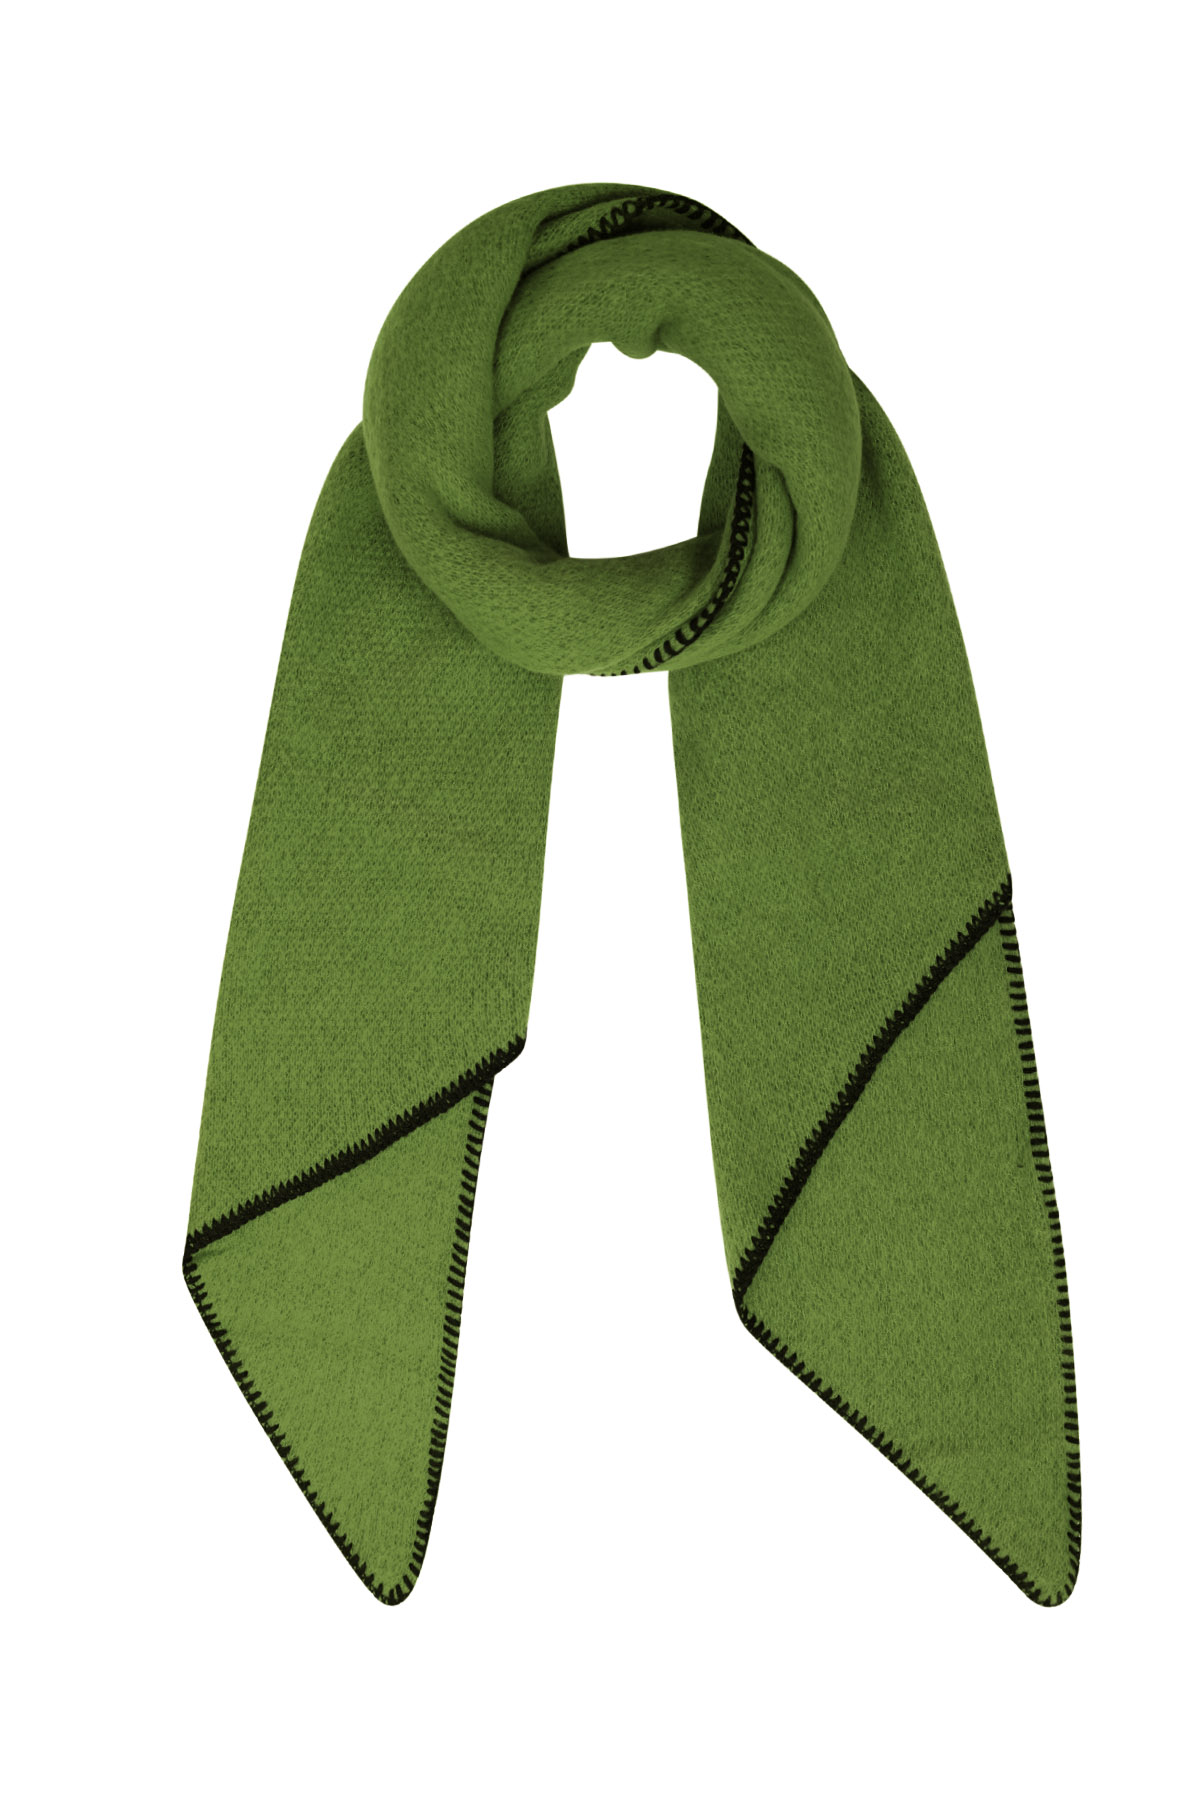 Winter scarf single-colored with black stitching - green 